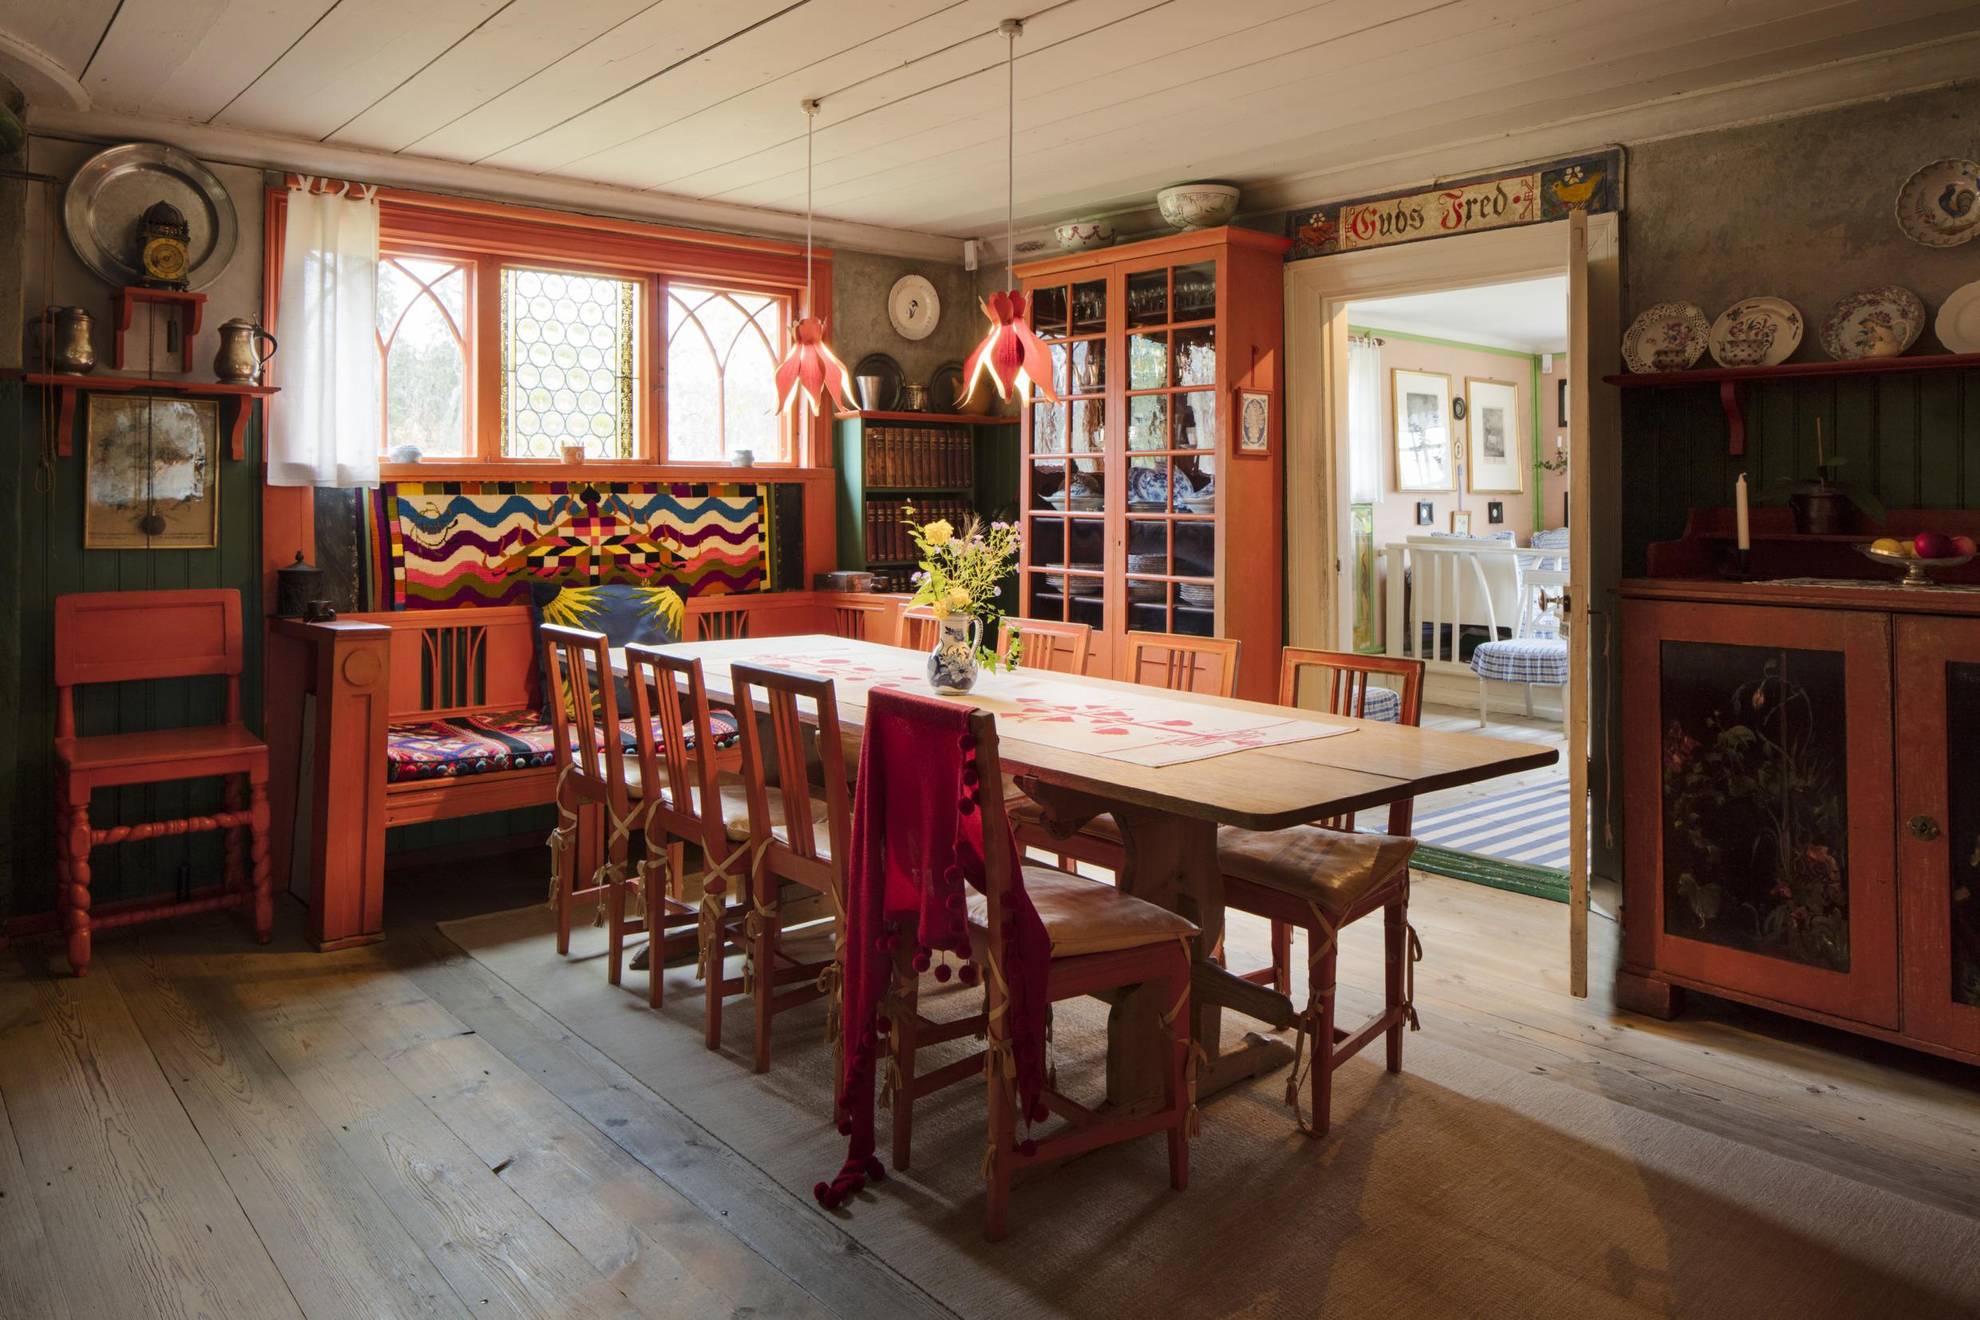 Historical Swedish interior design at Lilla Hyttnäs, with a large dinner table, red wooden furniture and historical porcelain on some walls.